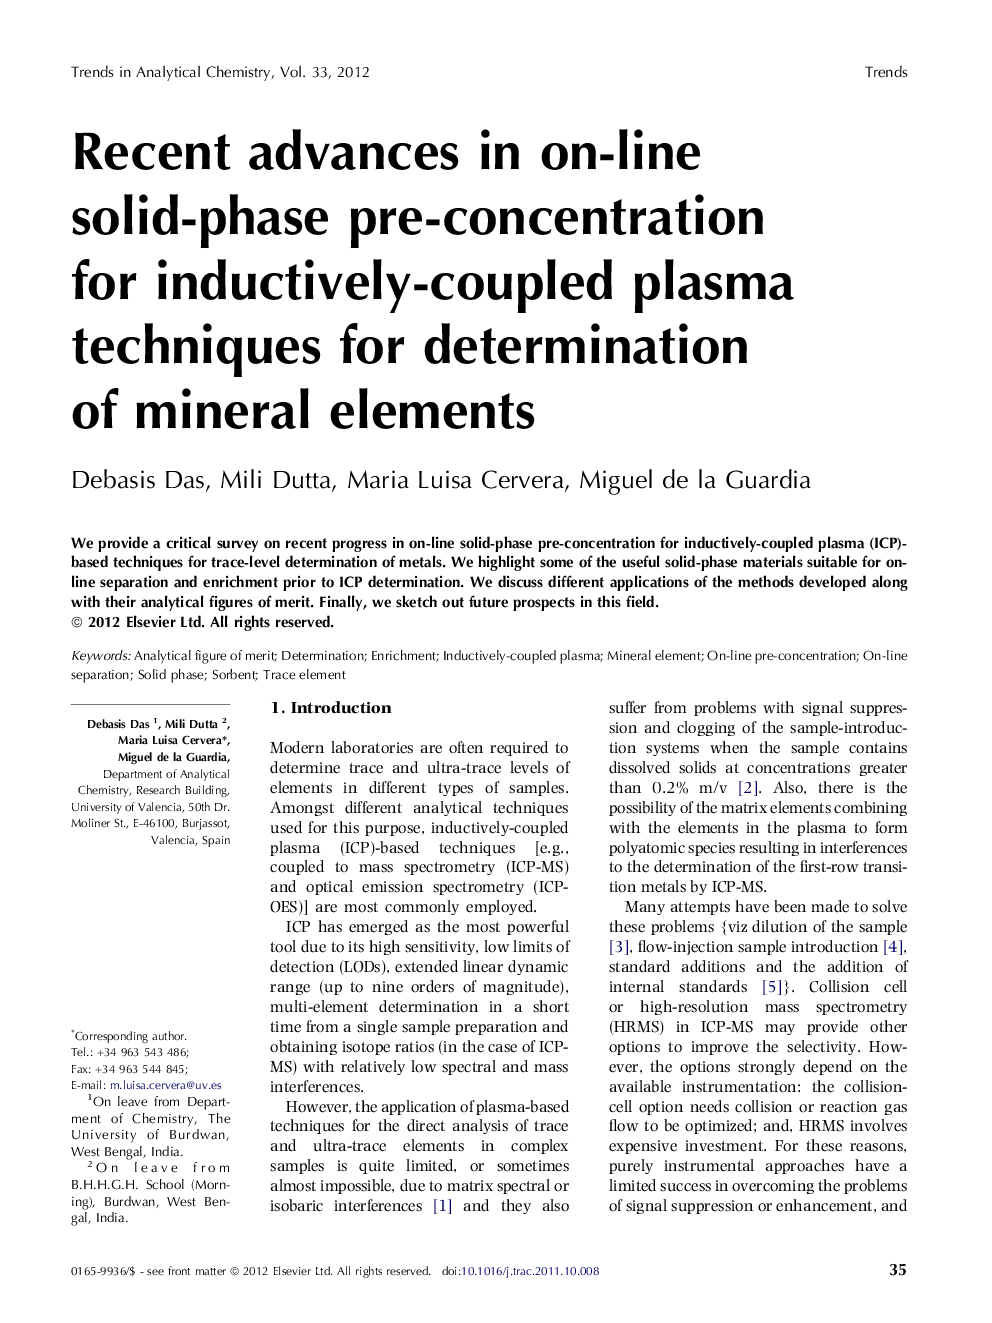 Recent advances in on-line solid-phase pre-concentration for inductively-coupled plasma techniques for determination of mineral elements